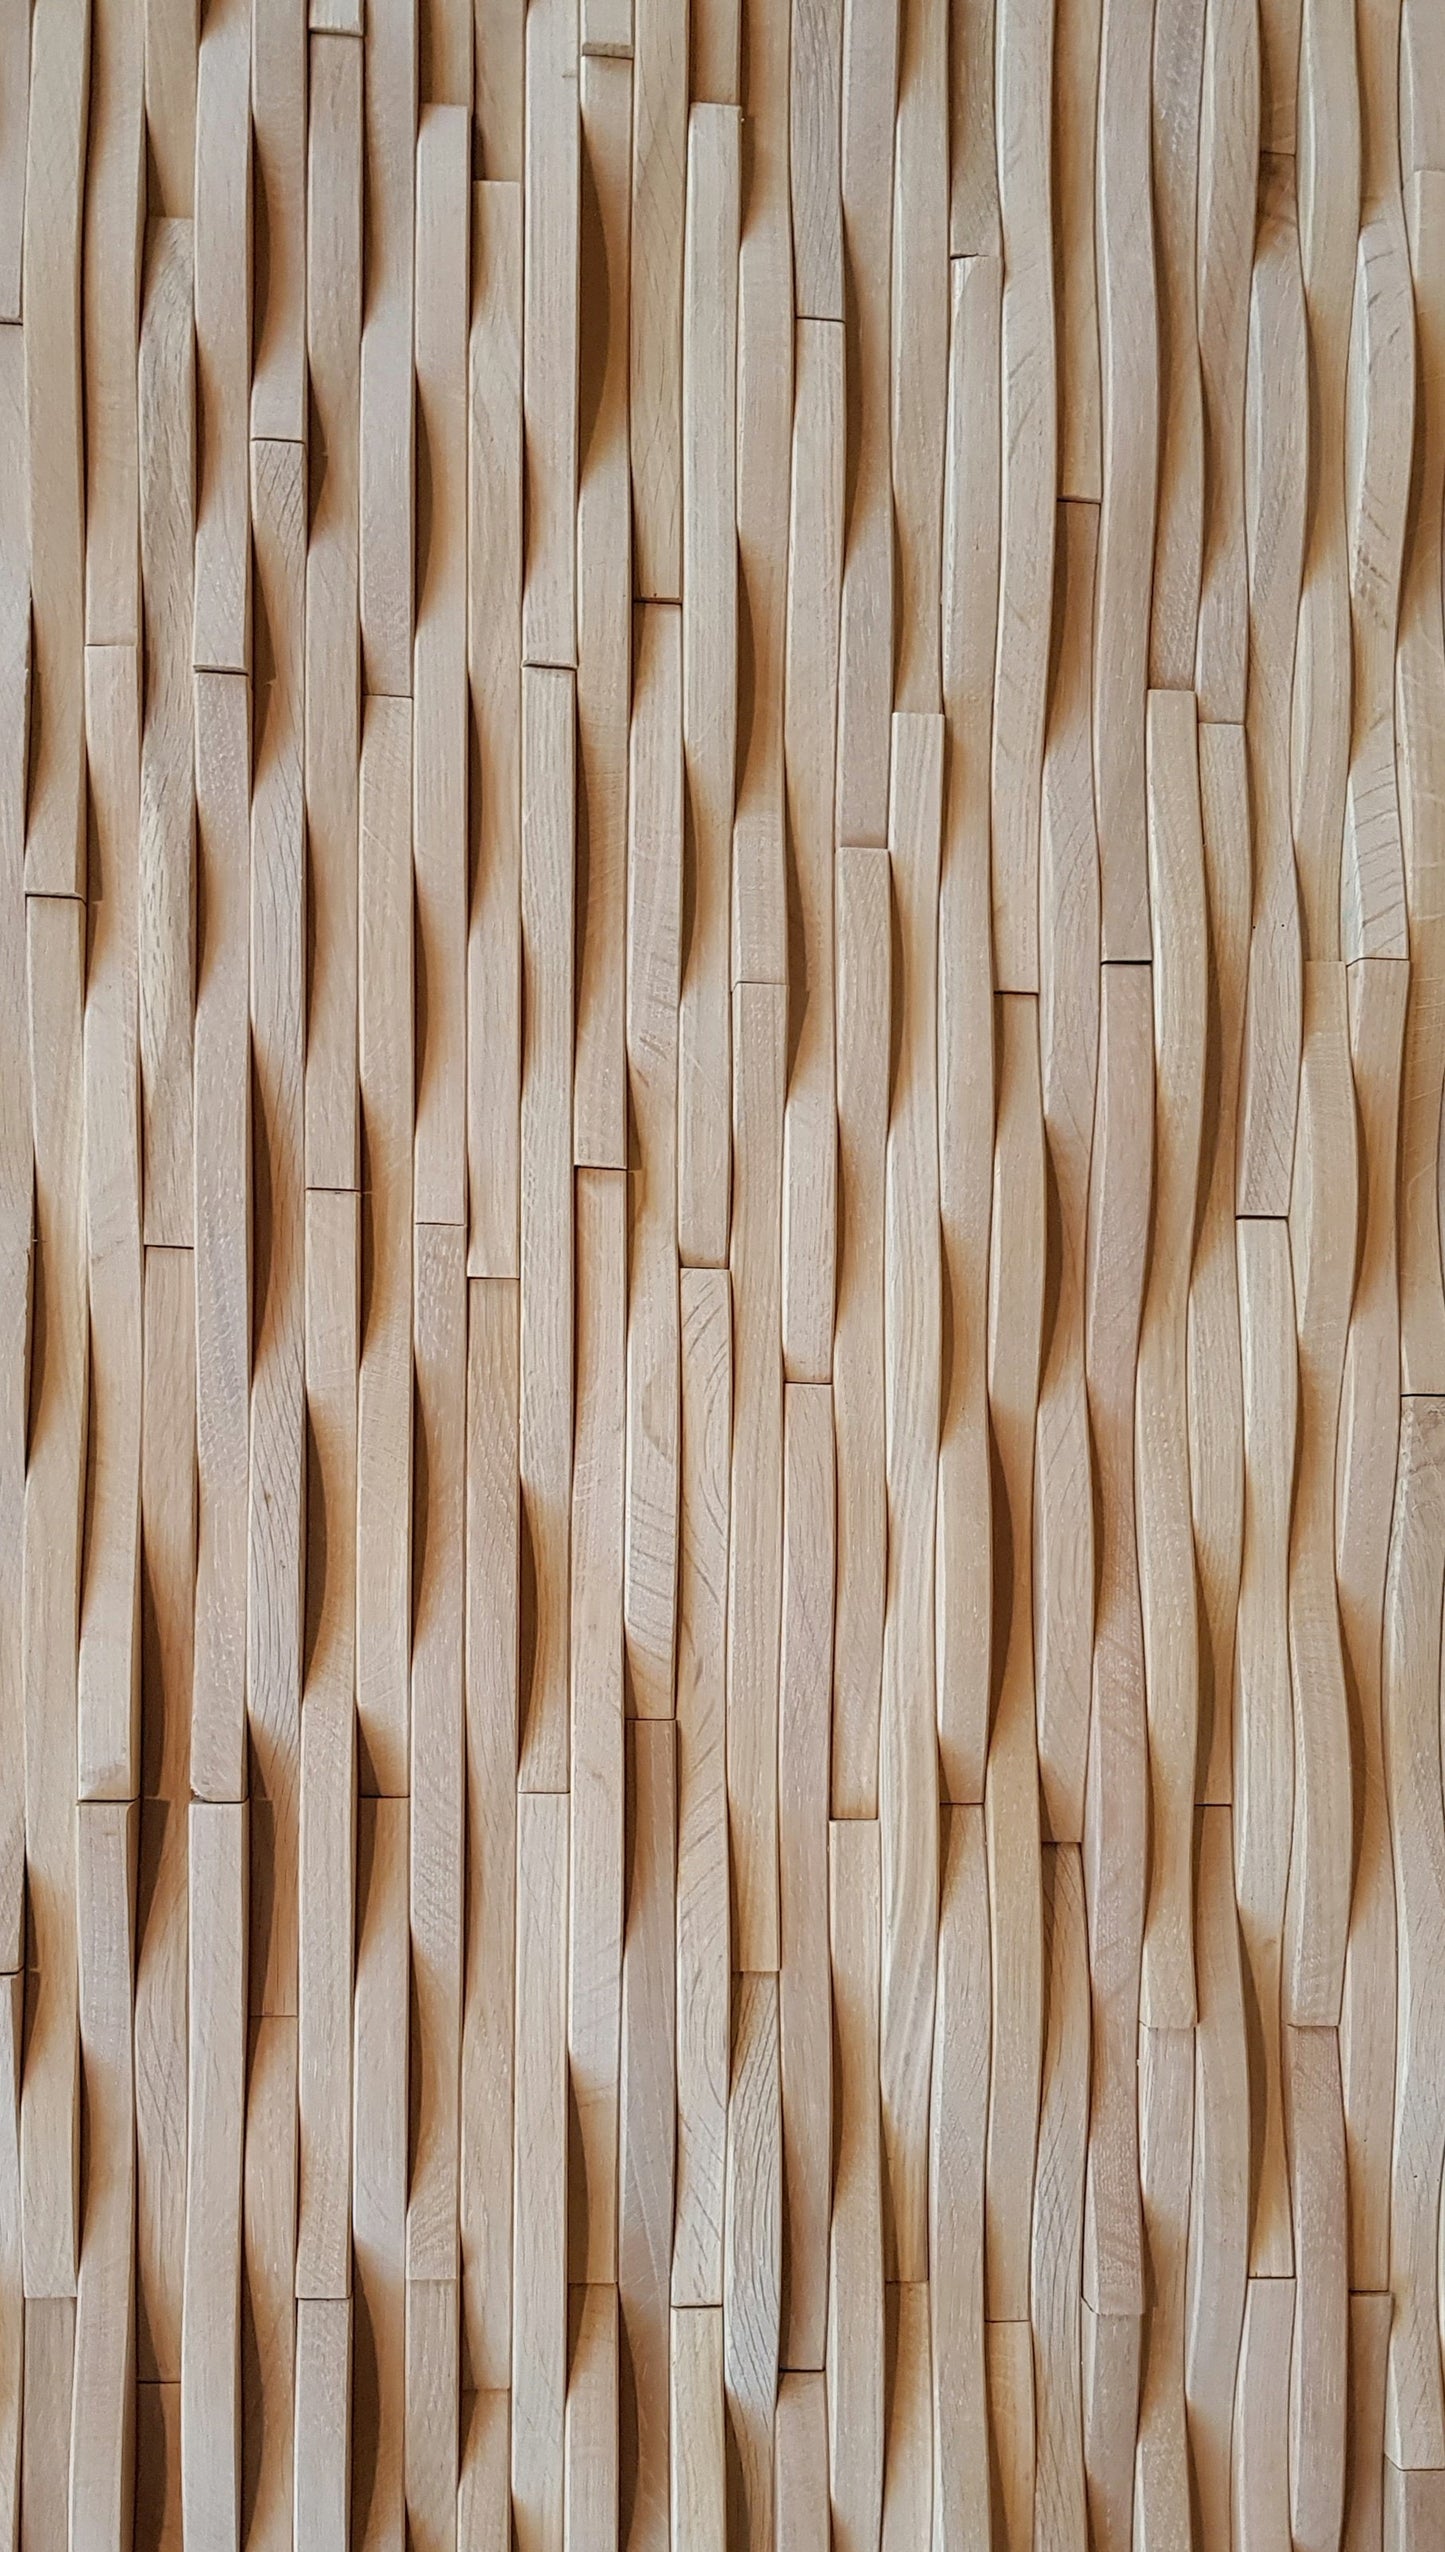 acoustic diffuser panel in oak for wall